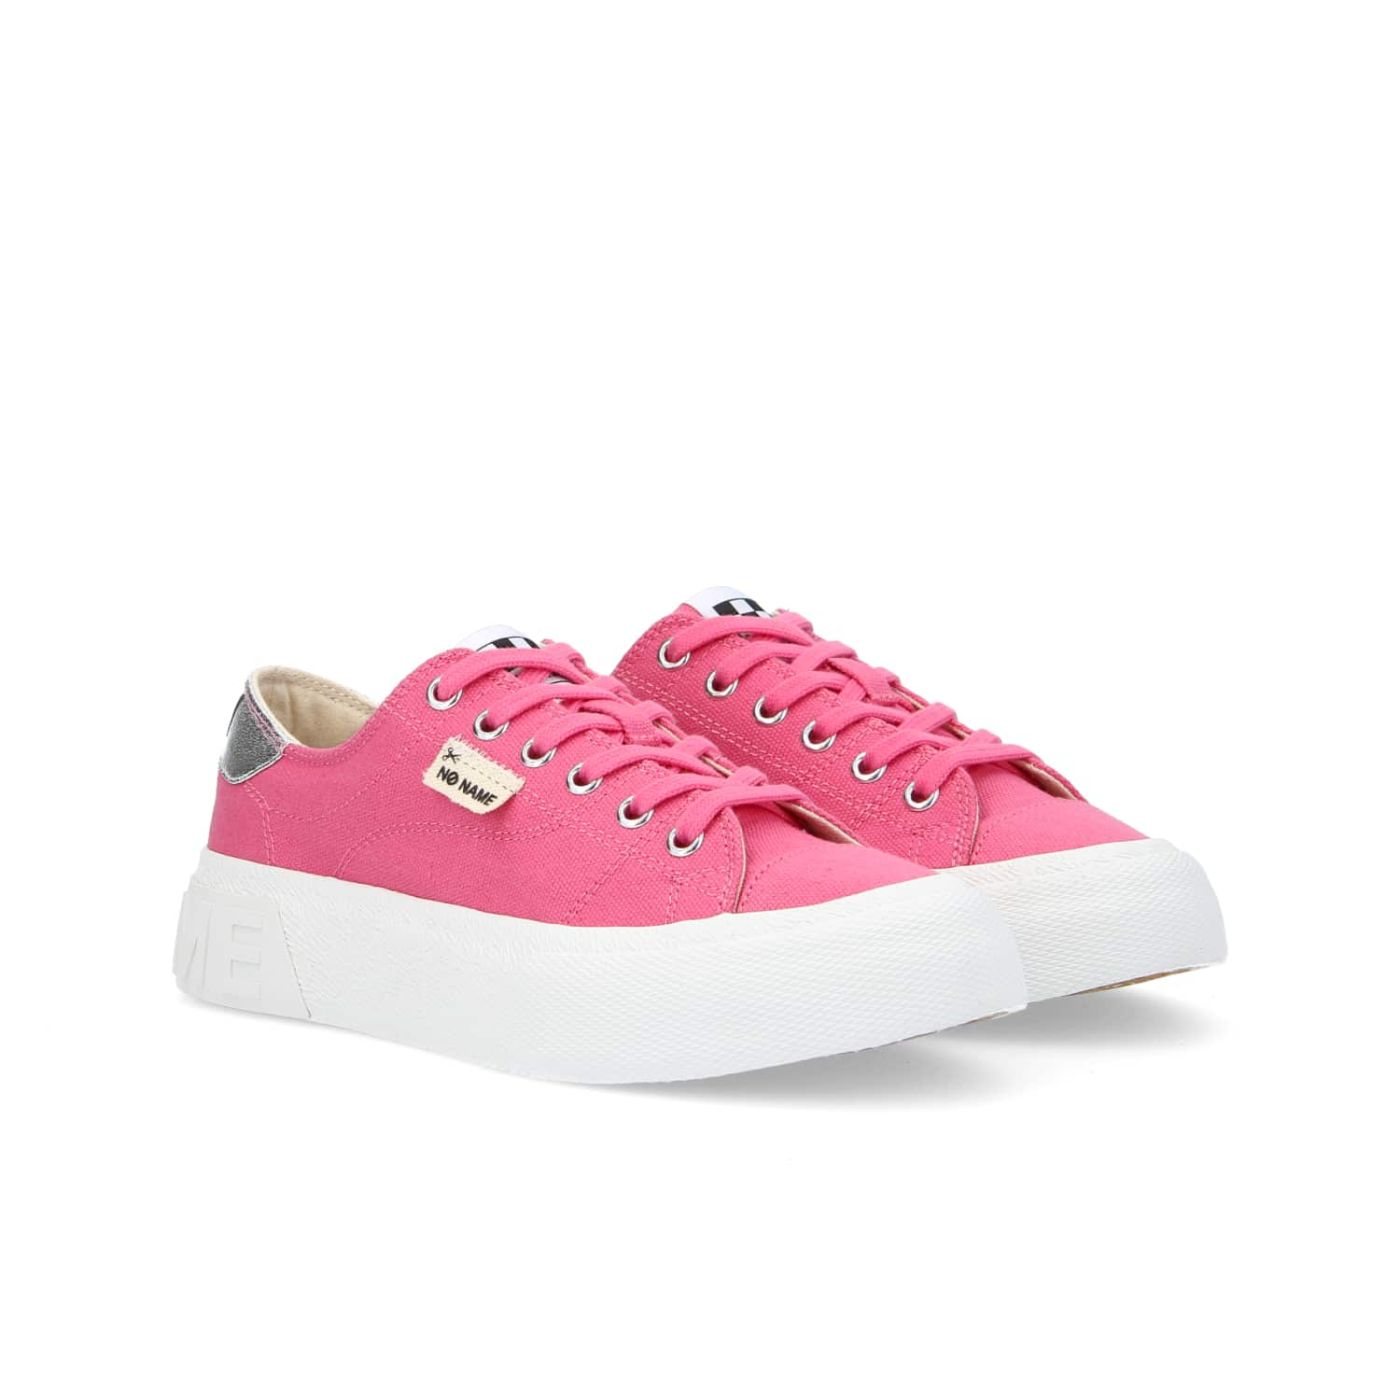 RESET SNEAKER W - CANVAS RECYCLED - CANDY